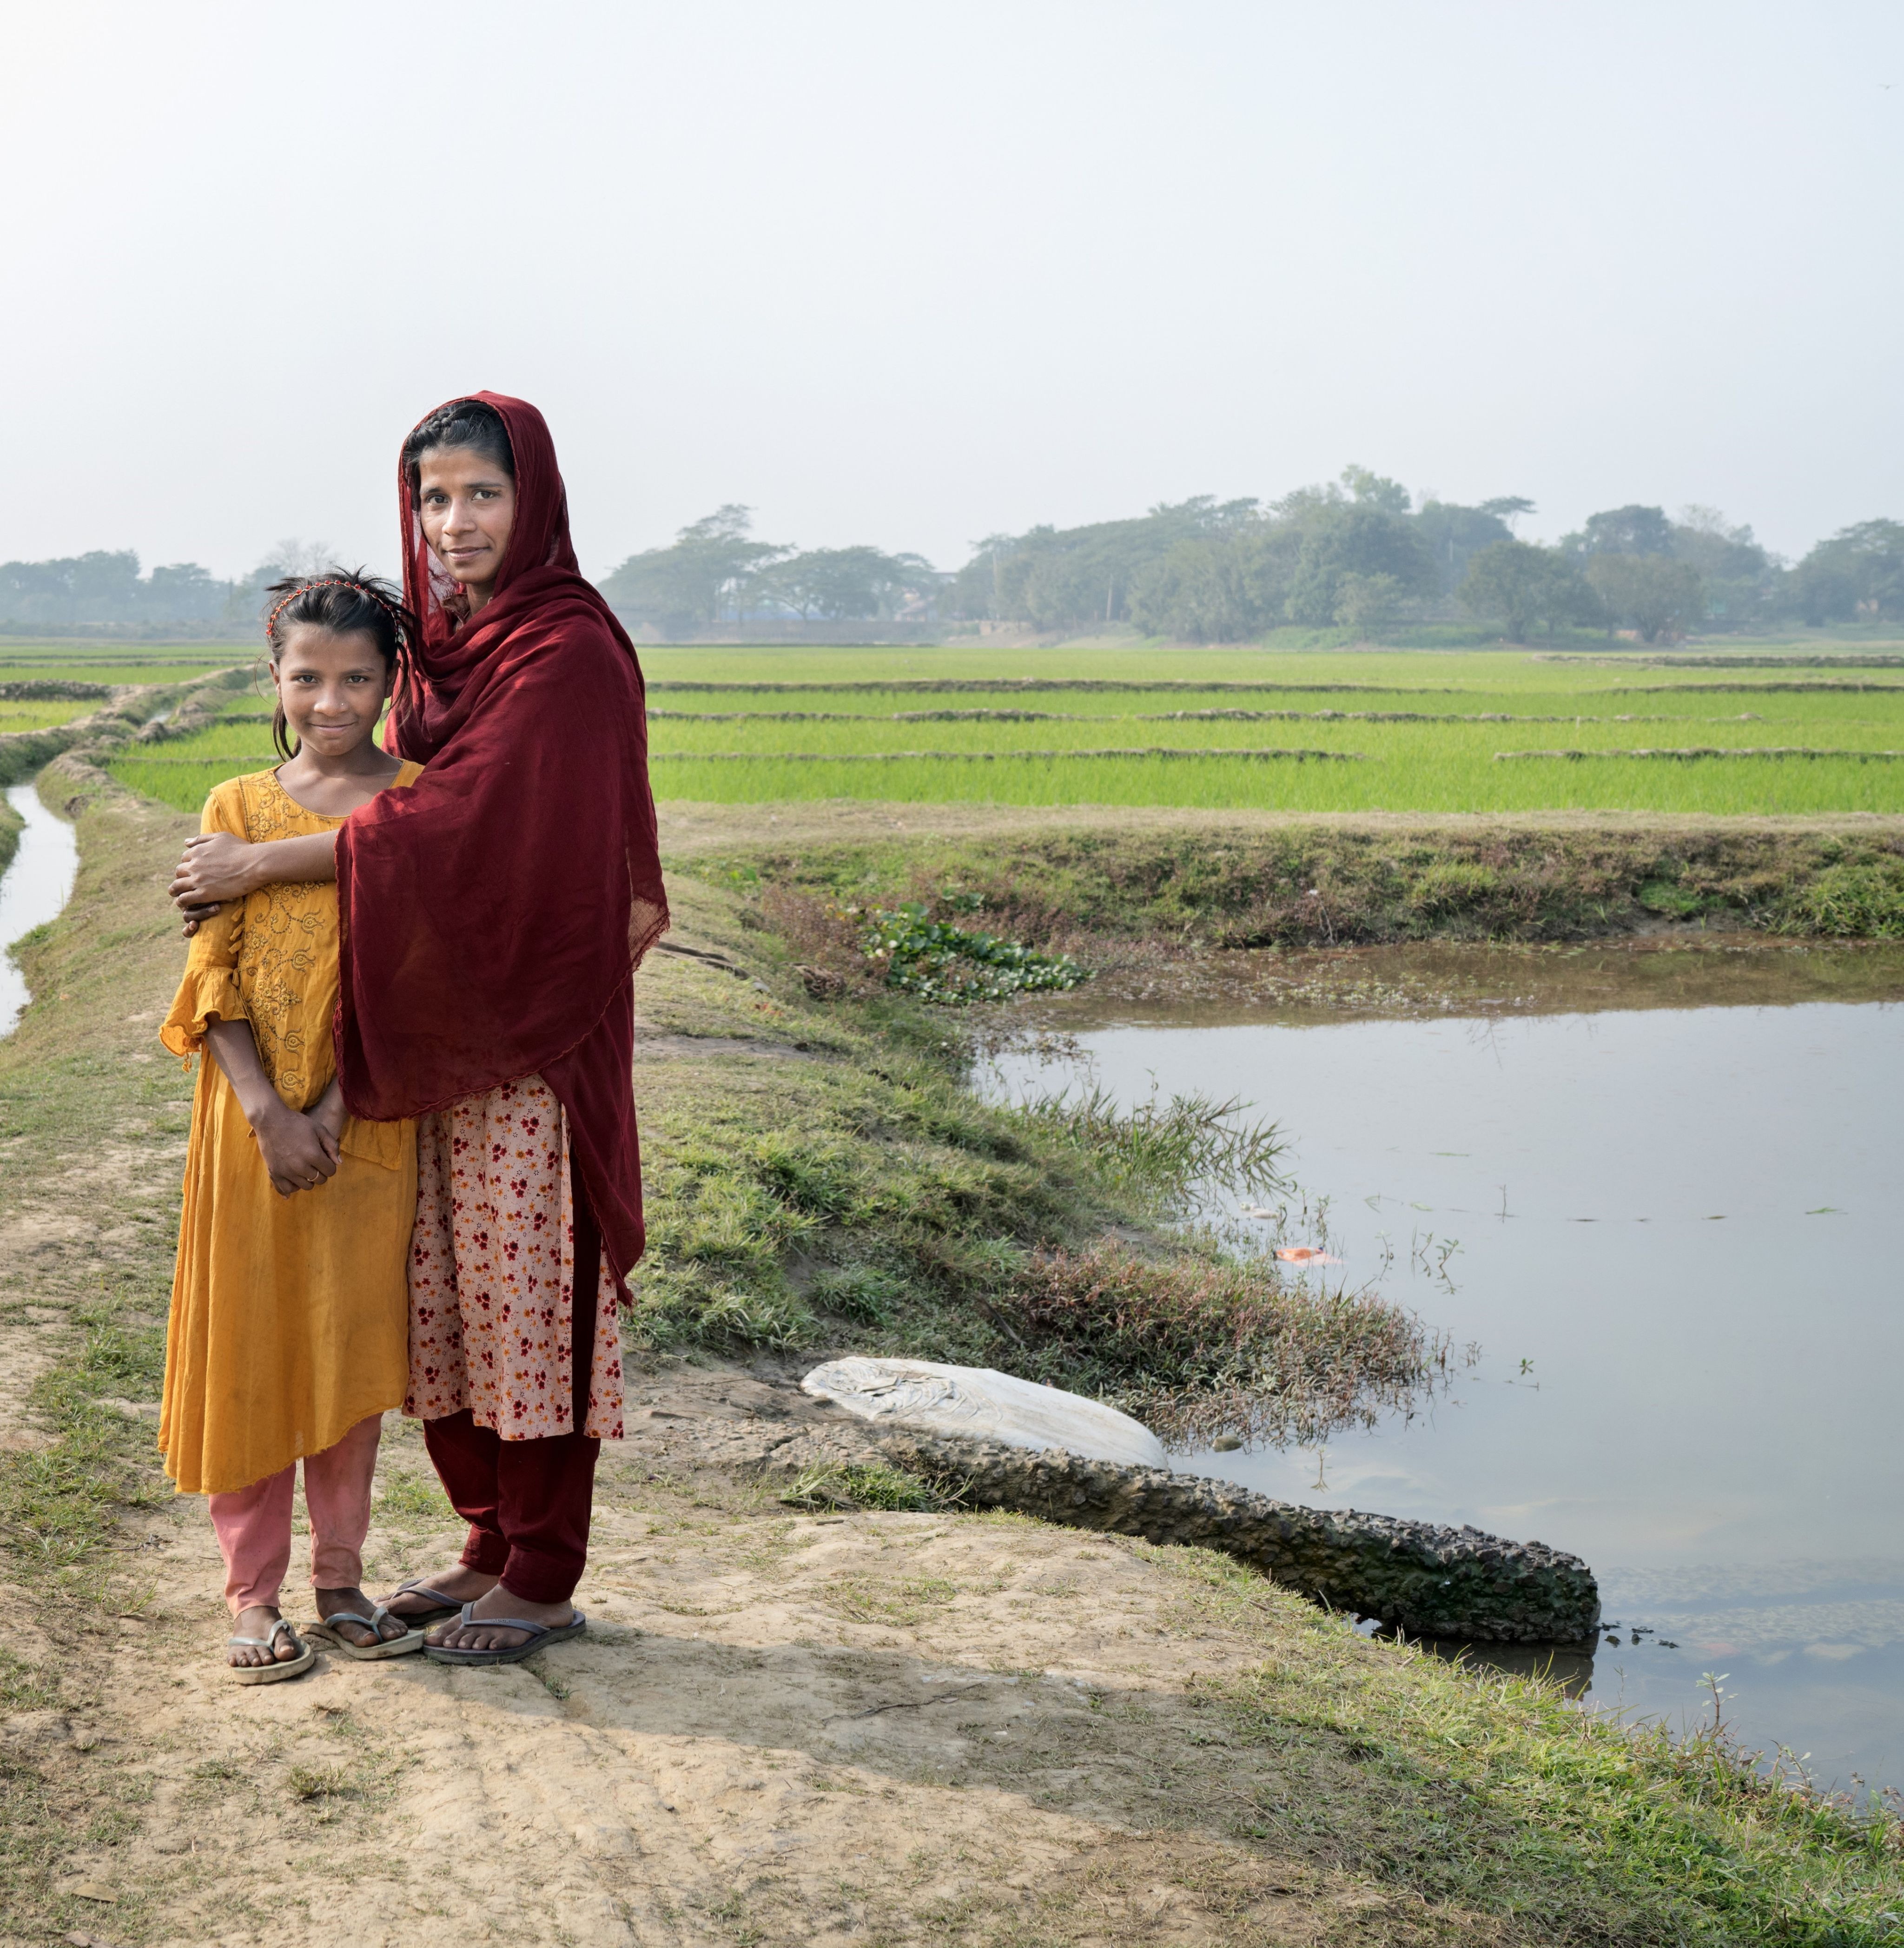 Portrait of Munni, 18, and her sister Tanni, 12, by Munni's fish pond at their home in Sylhet, Bangladesh